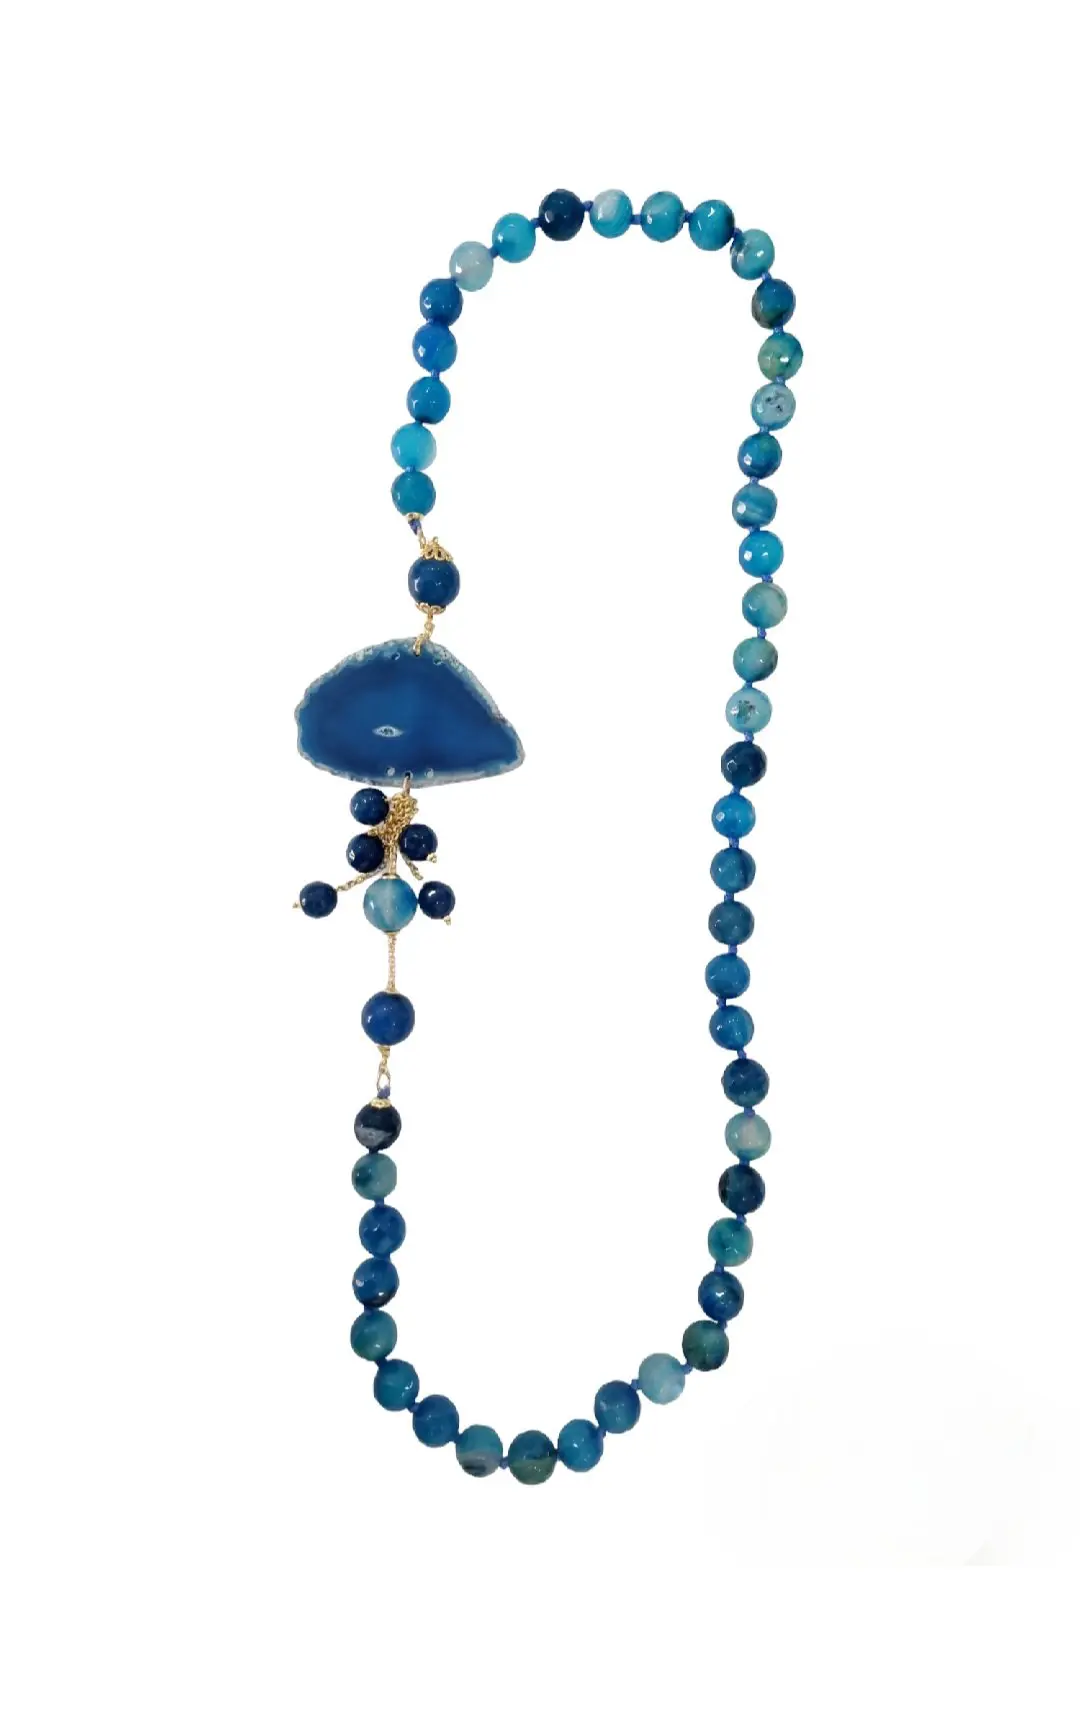 Necklace made with striped blue agate and golden brass elements. Length 75cm